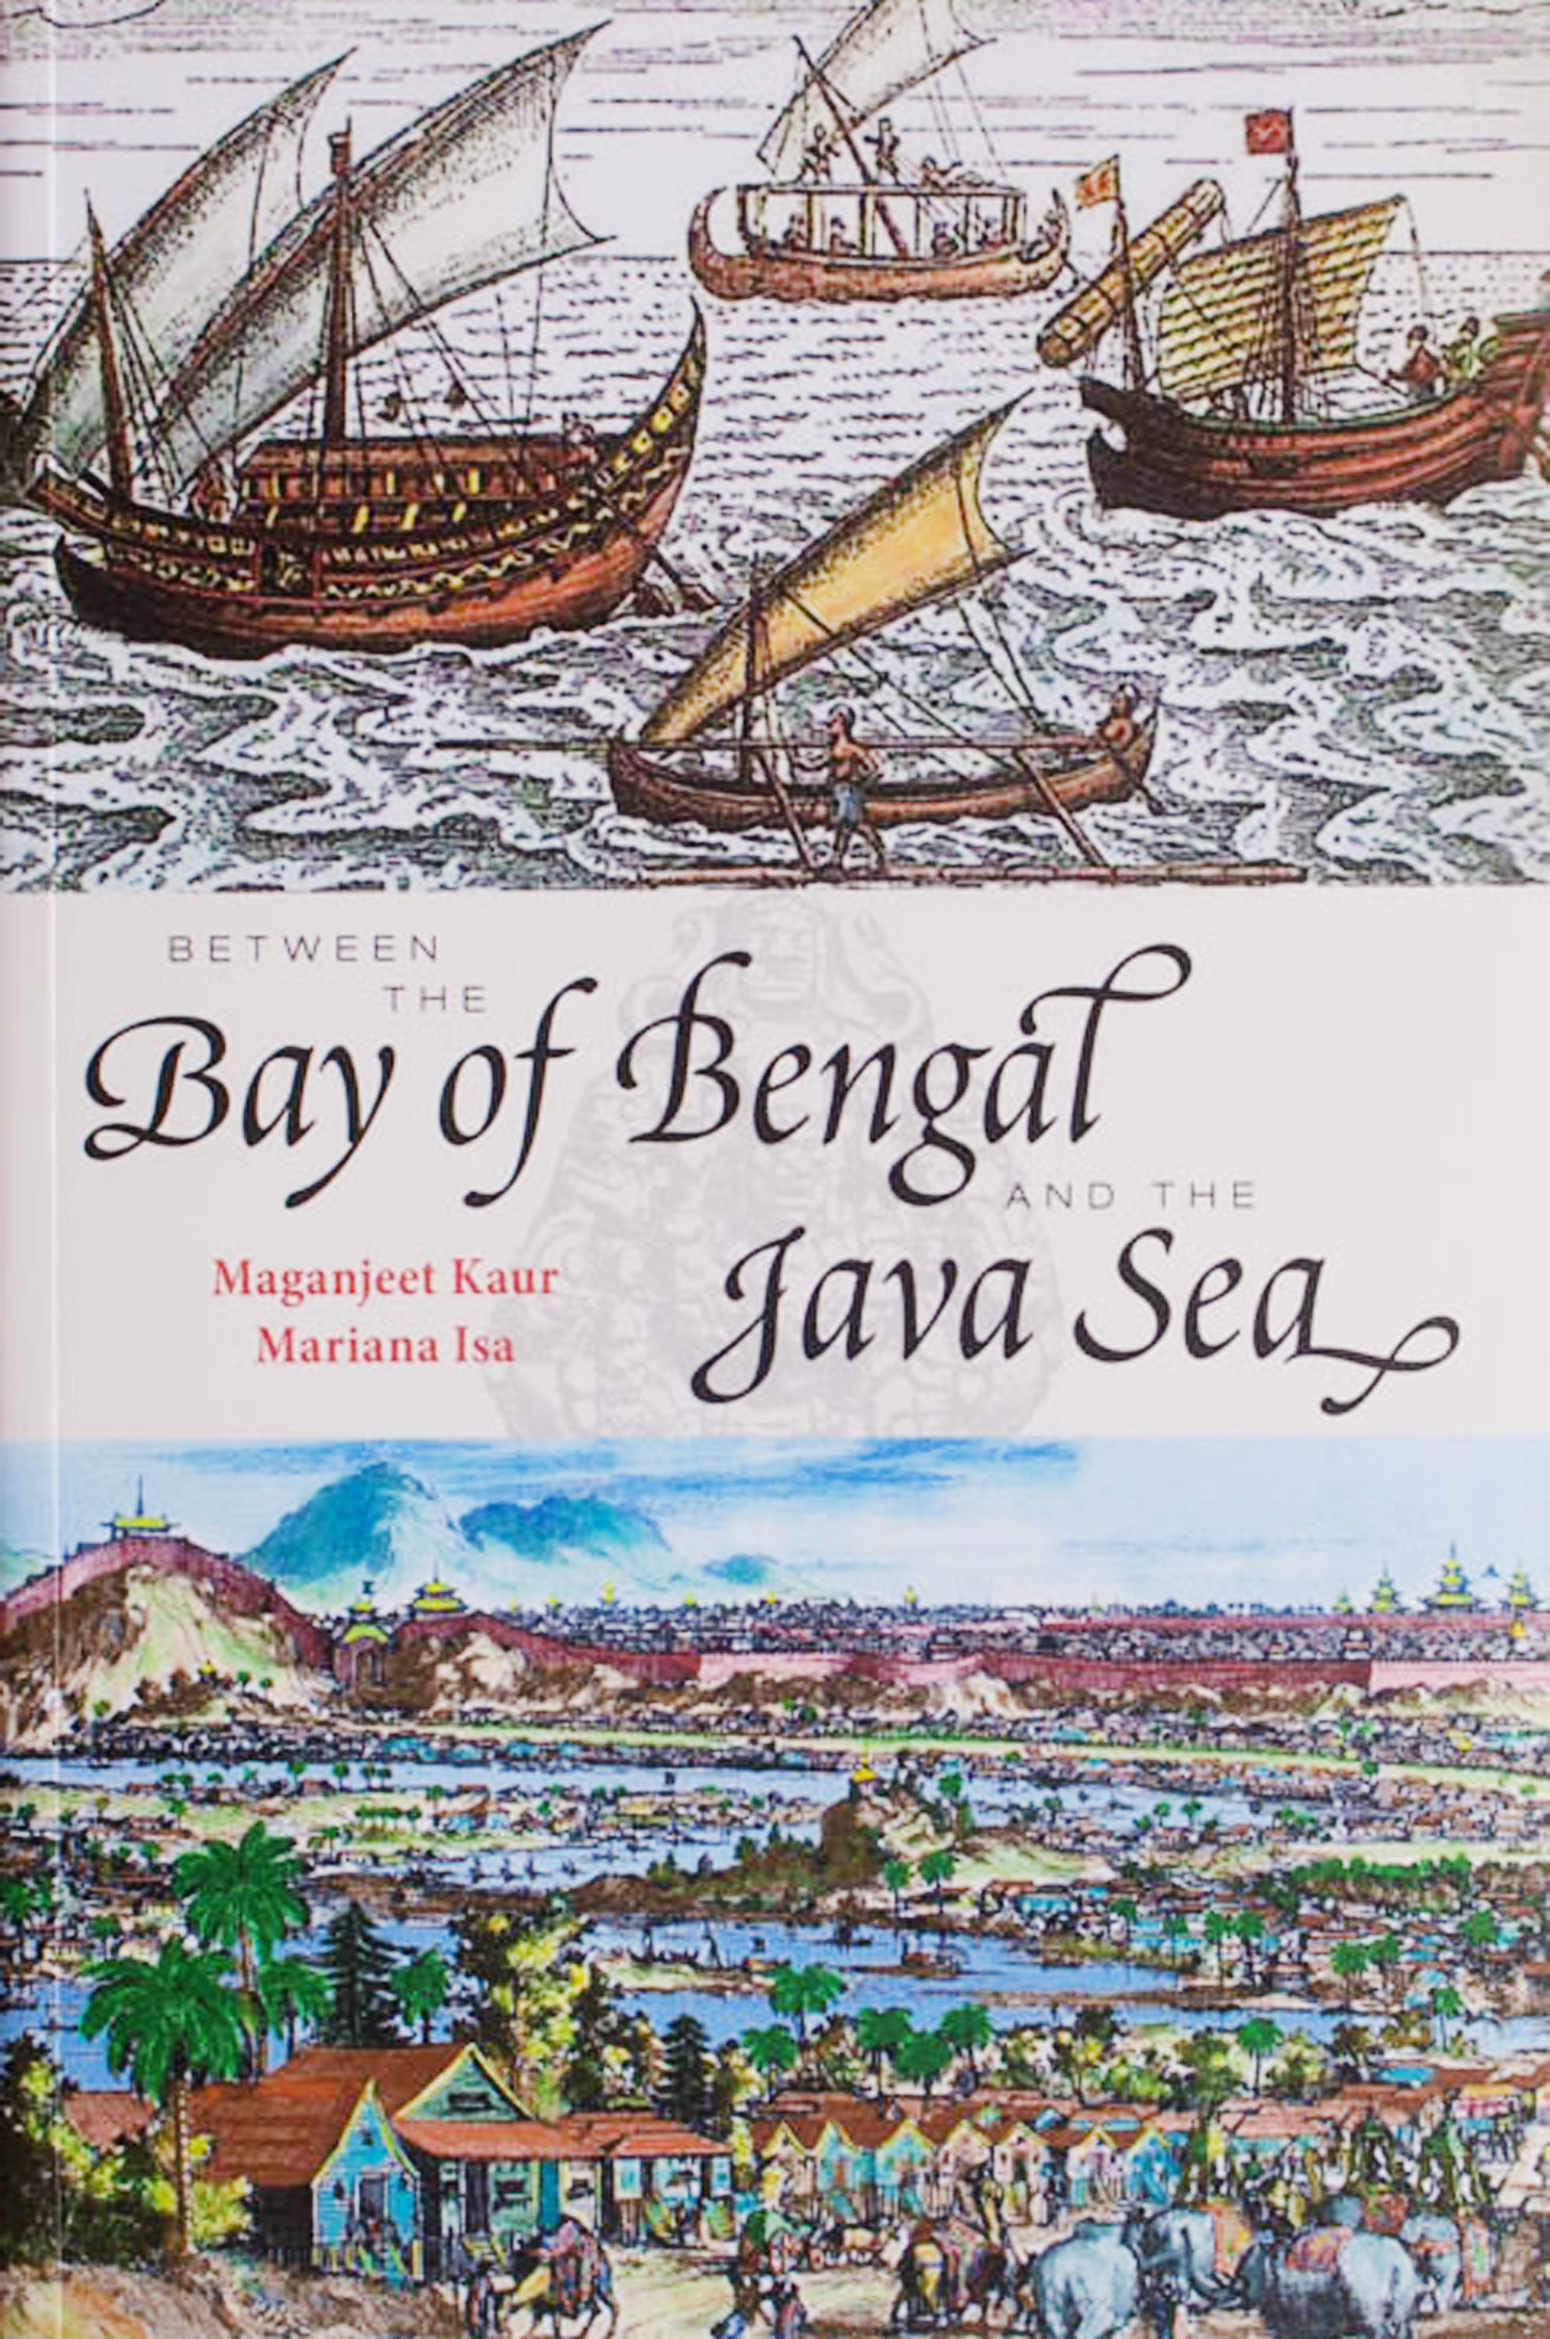 Between the Bay of Bengal and the Java Sea